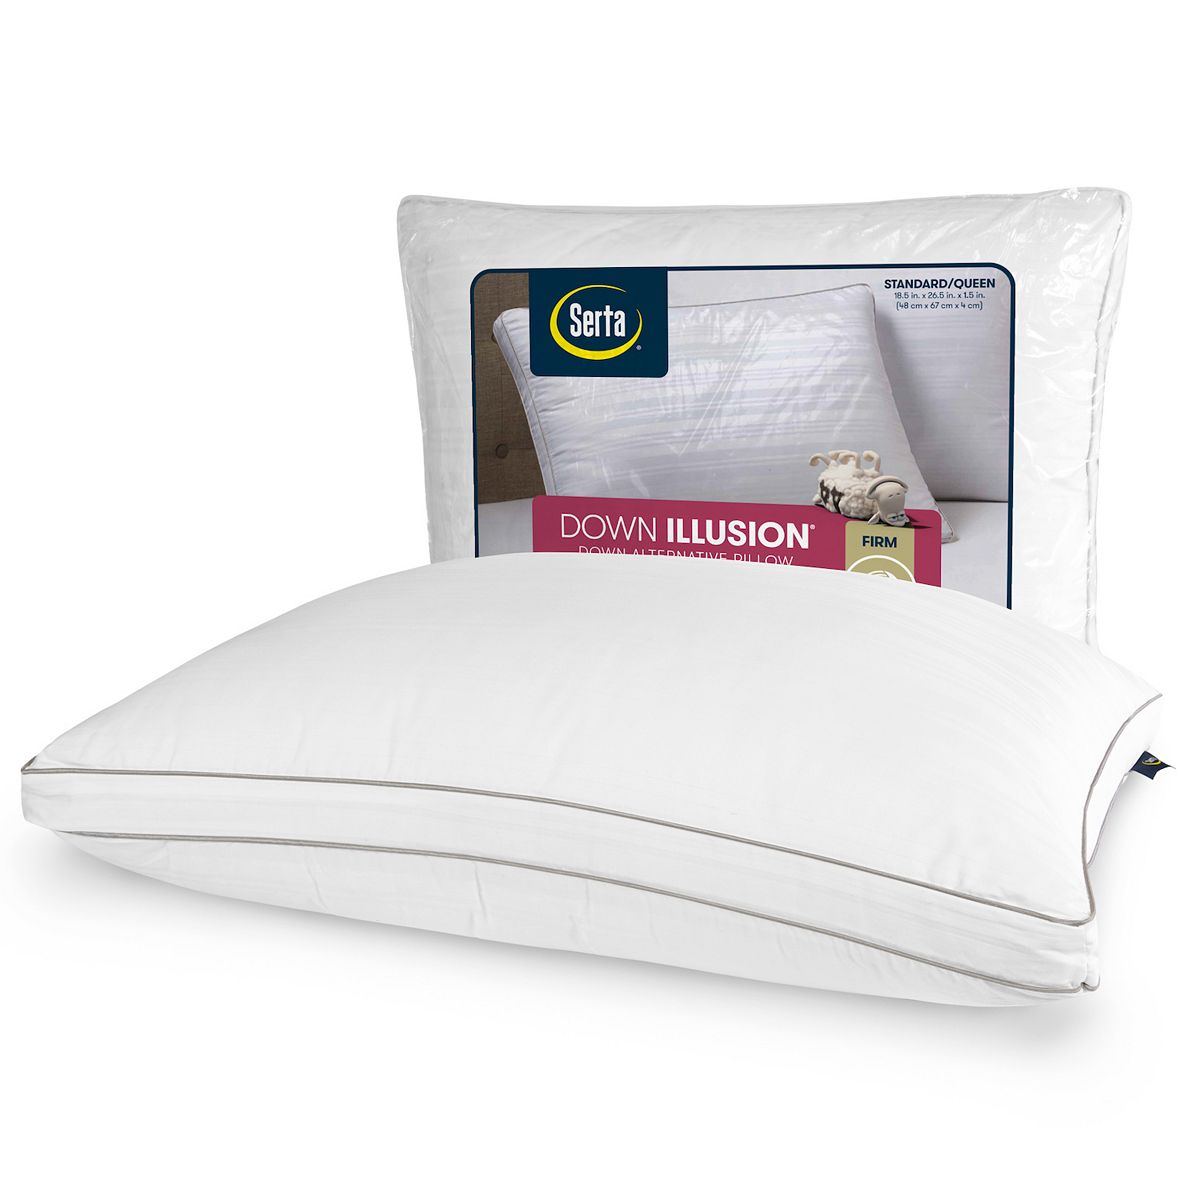 Serta Down Illusion Firm Bed Pillow, Down Bed Pillows King